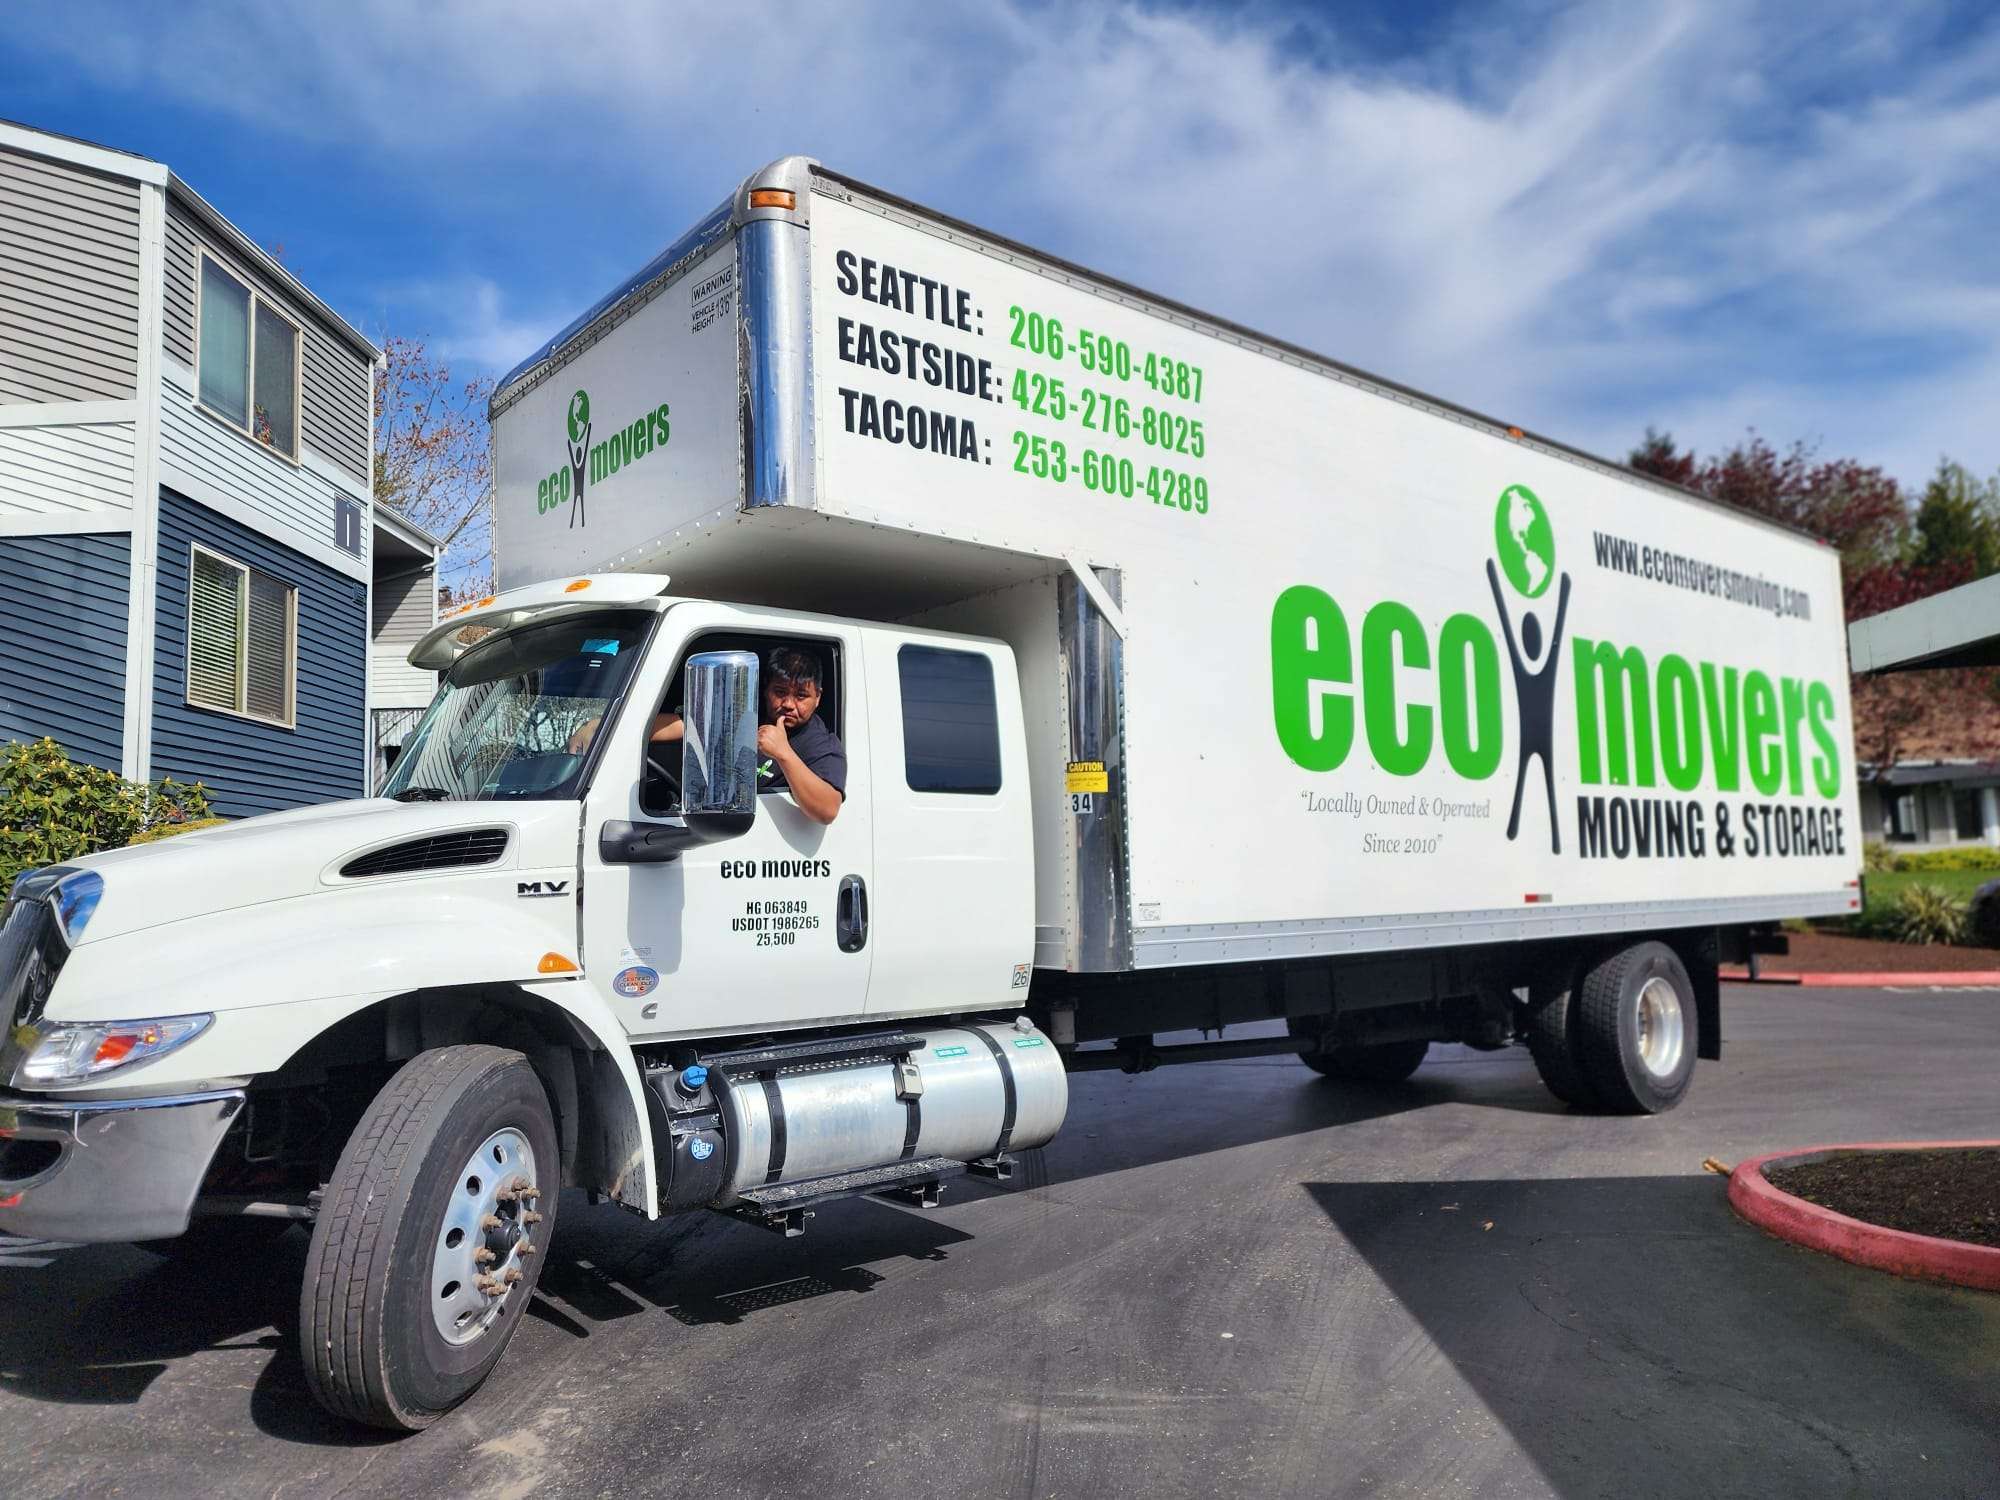 eco movers moving & storage